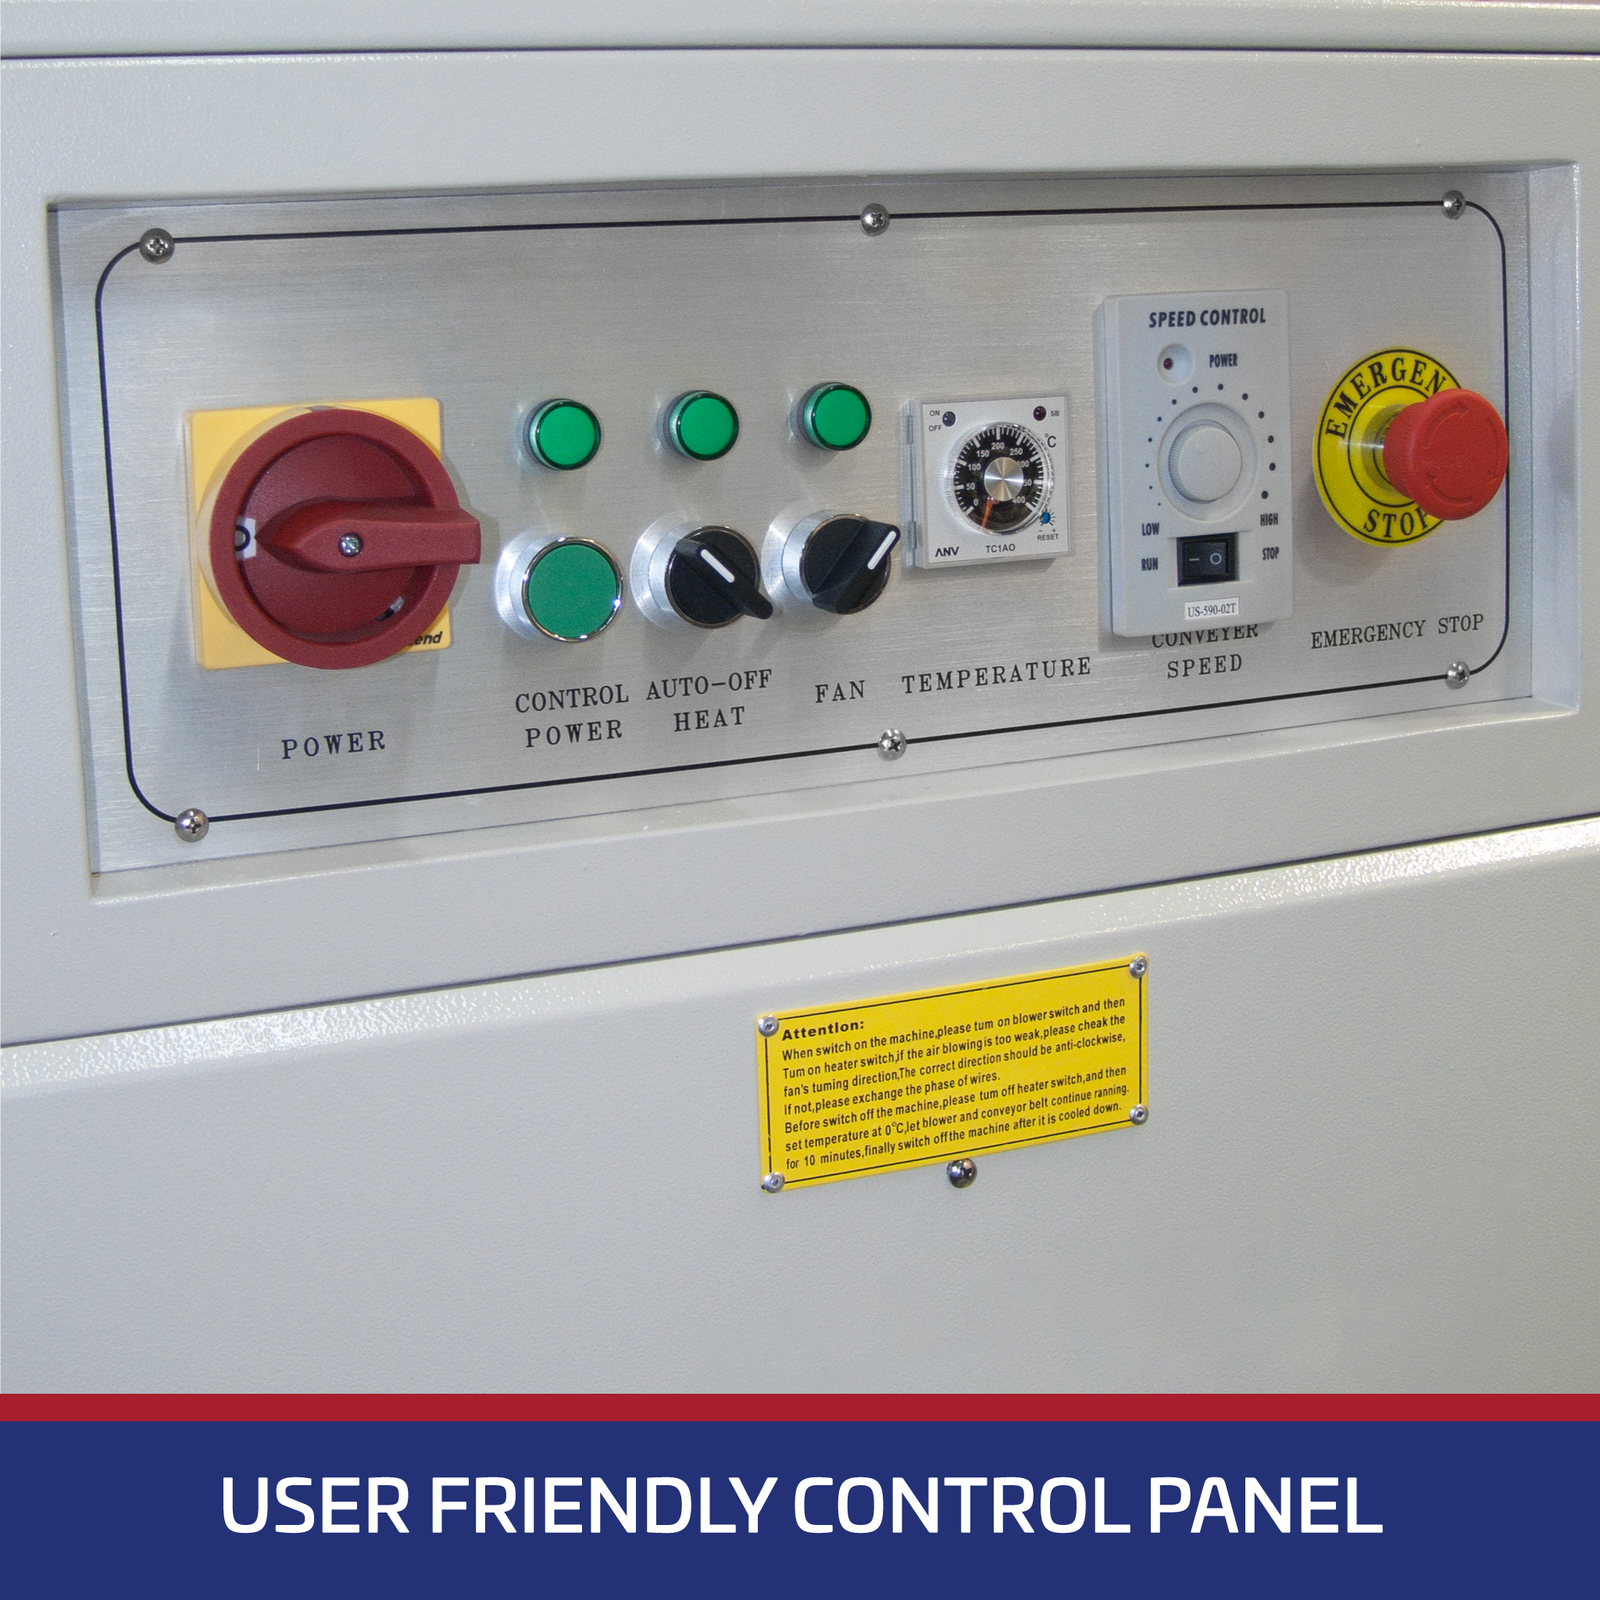 Close-up of the control panel of the heat wrapping shrink tunnel. There’s white text over blue background that reads “User Friendly Control Panel” 